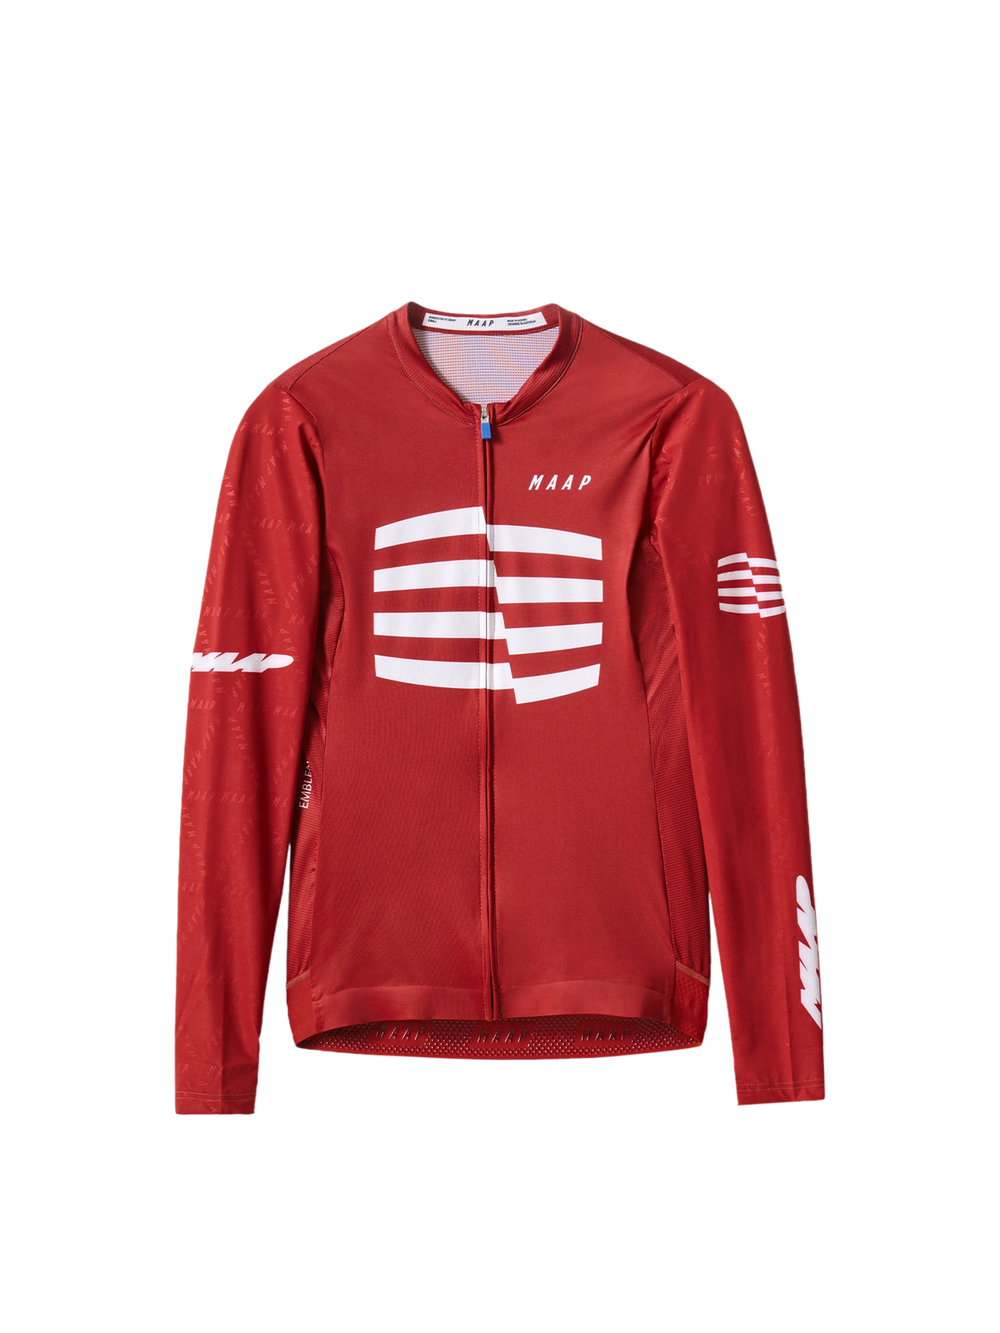 Product Image for Women's Sphere Pro Hex LS Jersey 2.0